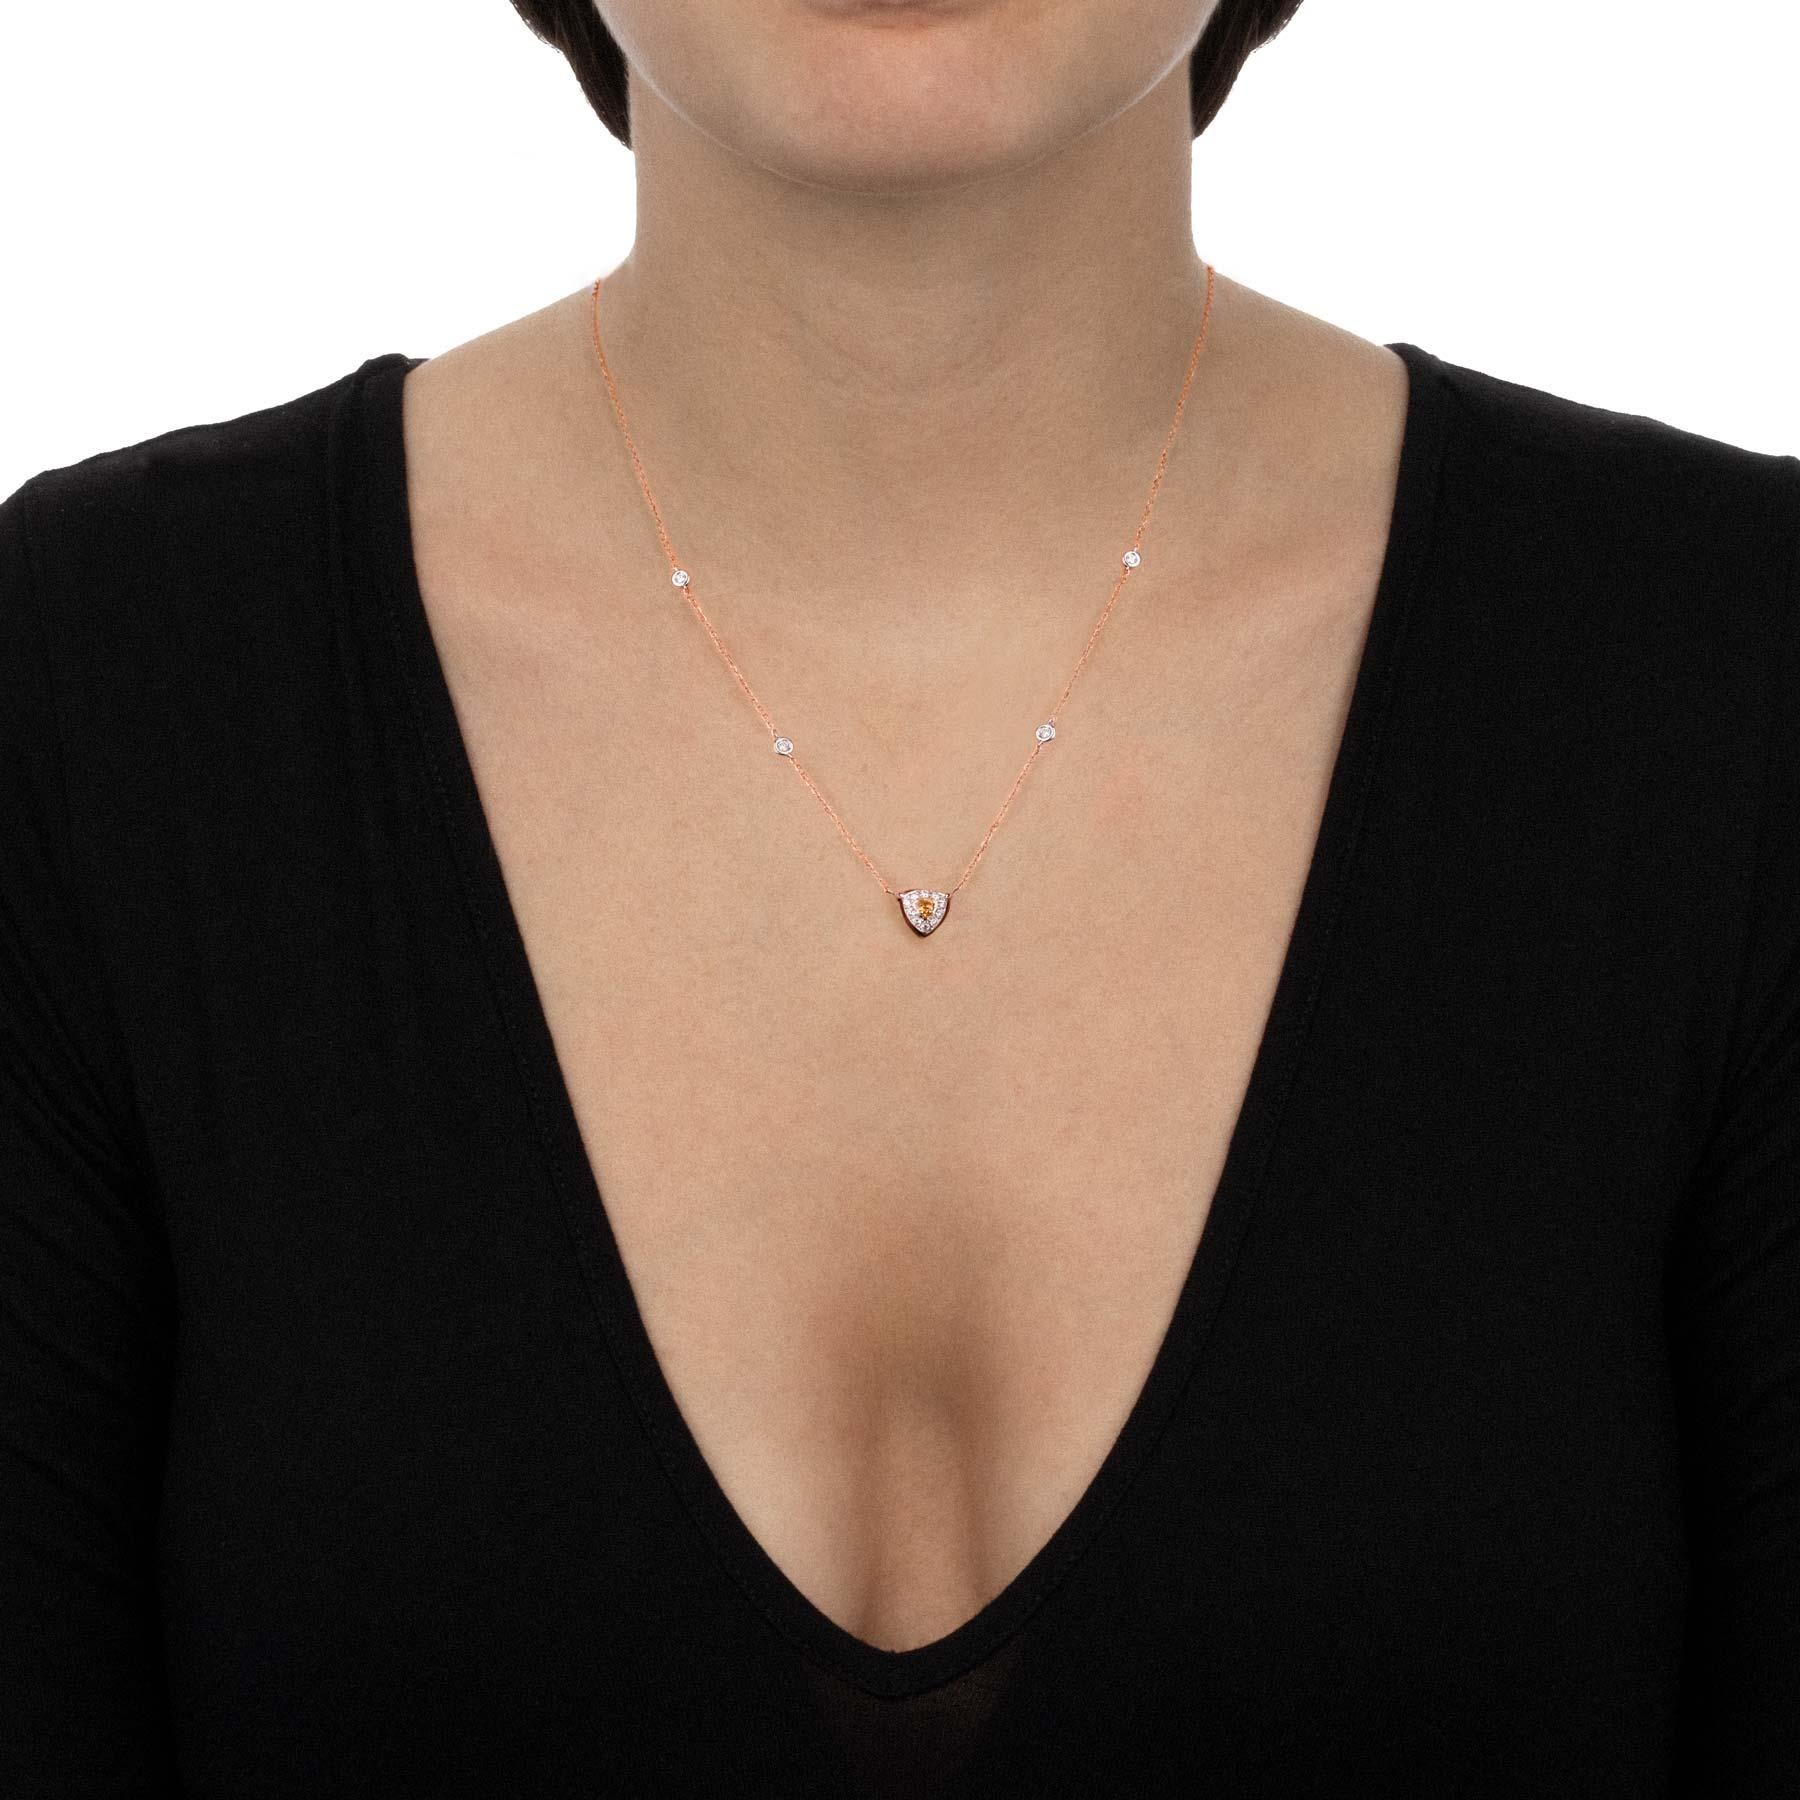 Round Cut Les Petits Bonbons Necklace Triangle with Citrine, Smoky Quartz and Diamonds For Sale